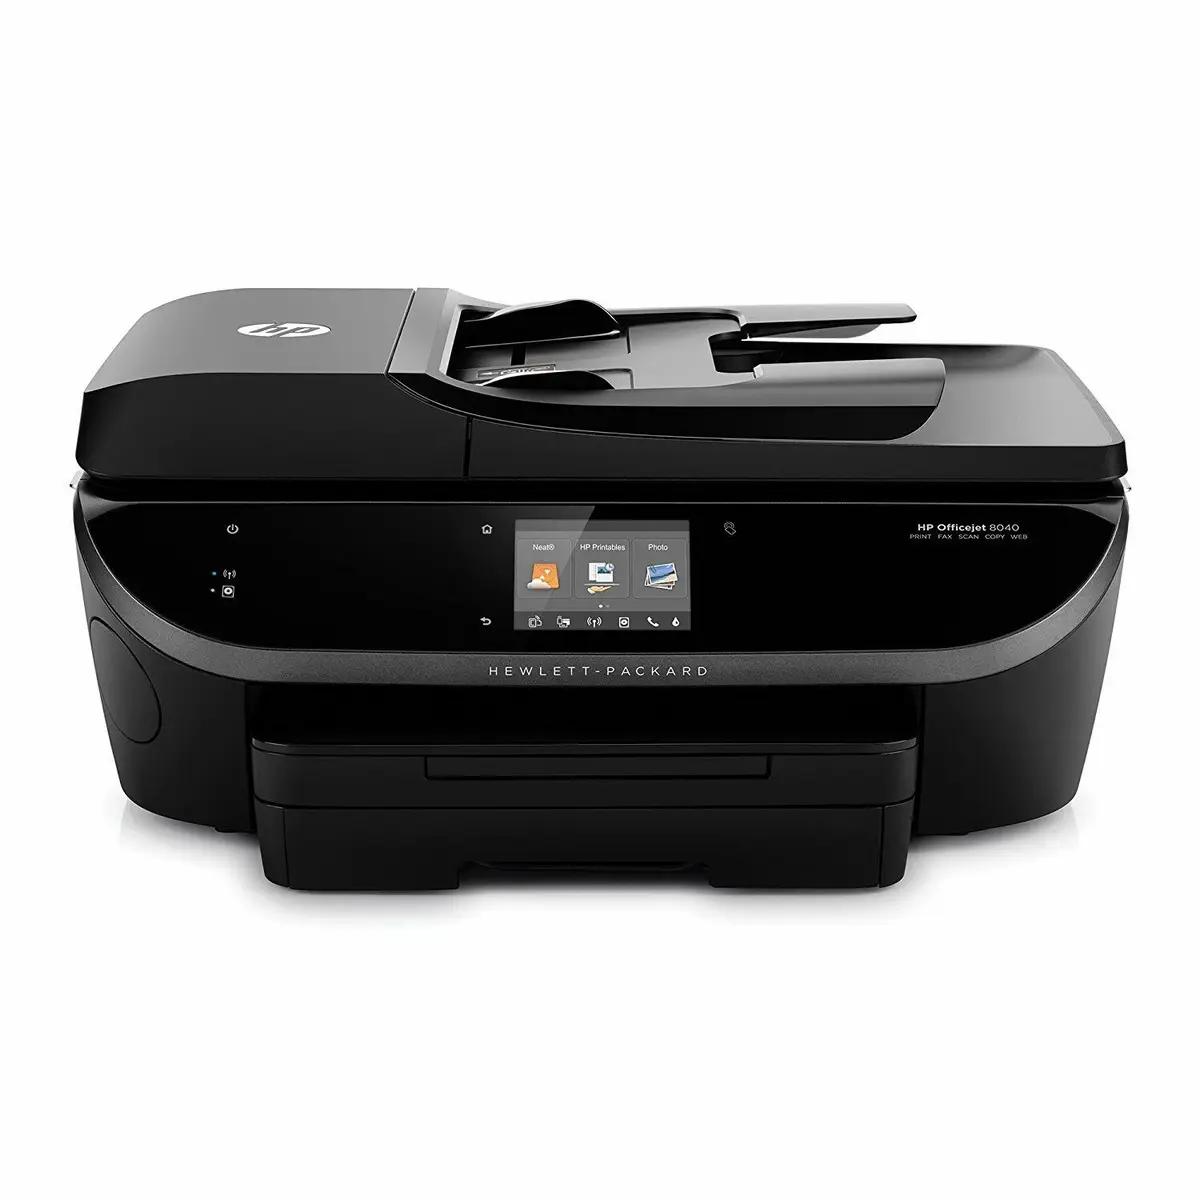 Hp all-in-one printer fax copier scanner: streamline your office workflow